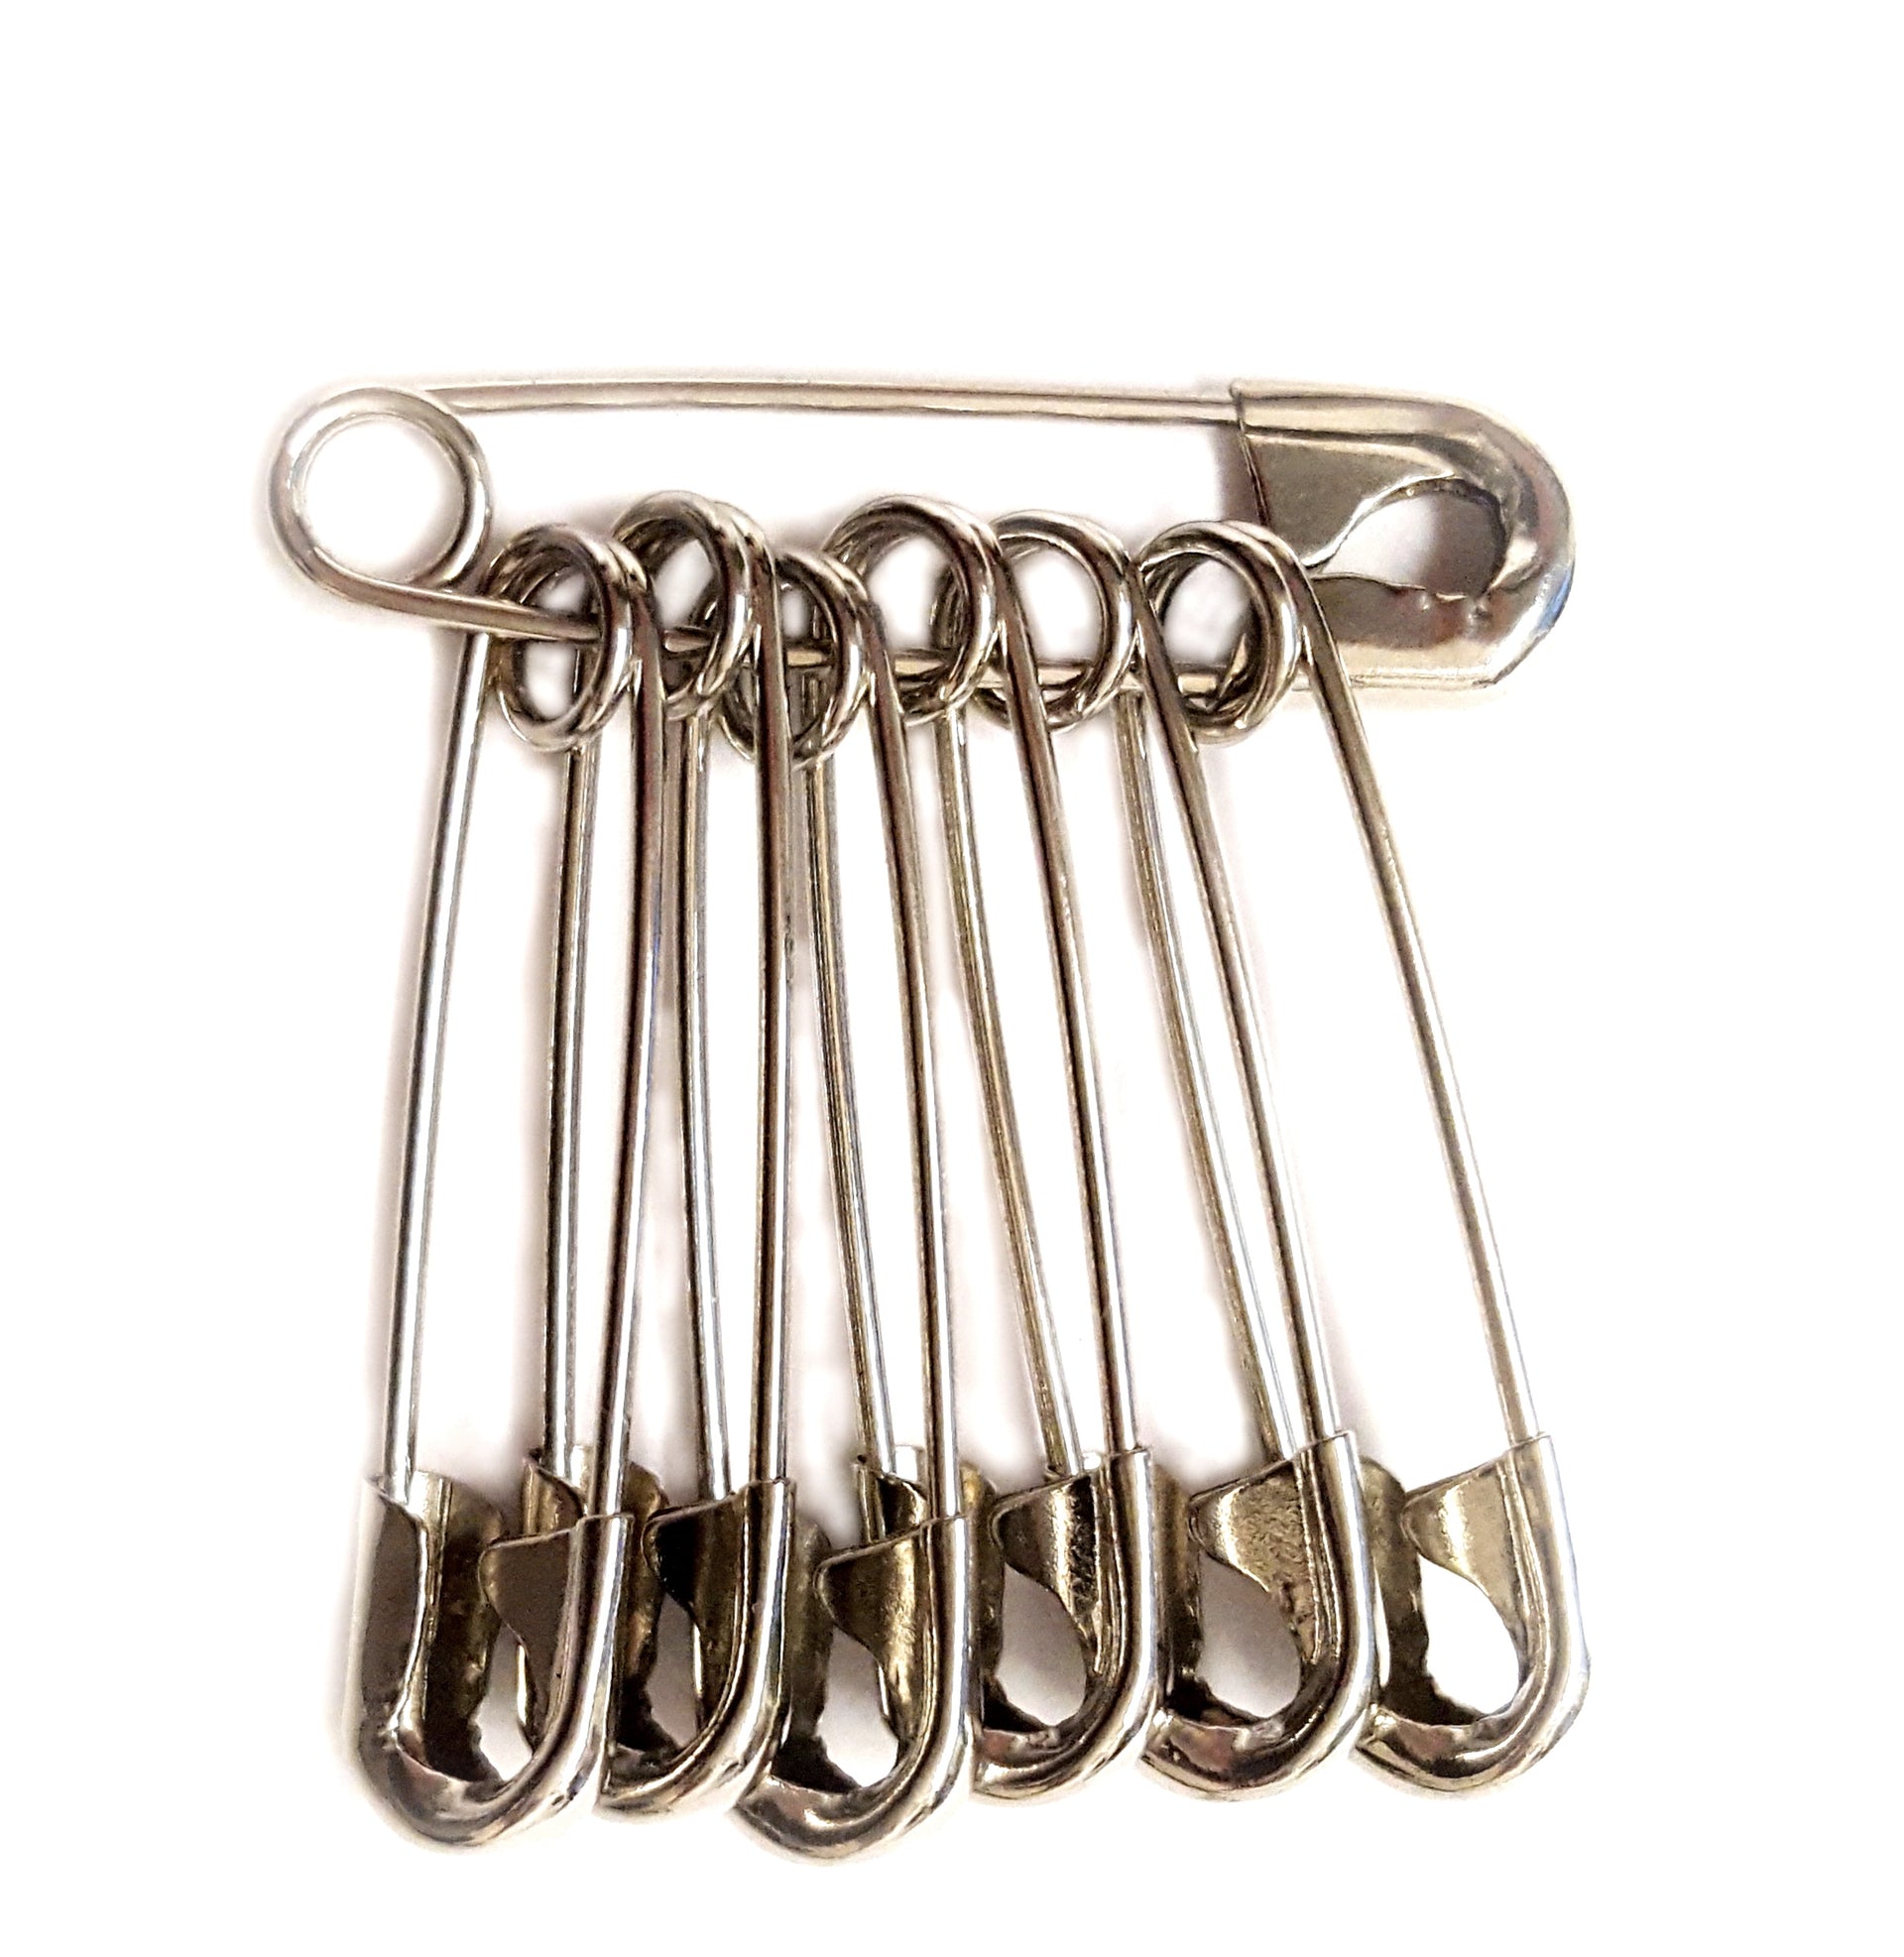 Niftyplaza 1440 Safety Pins, Size 1-1/16, Nickel Pleated, Made in USA